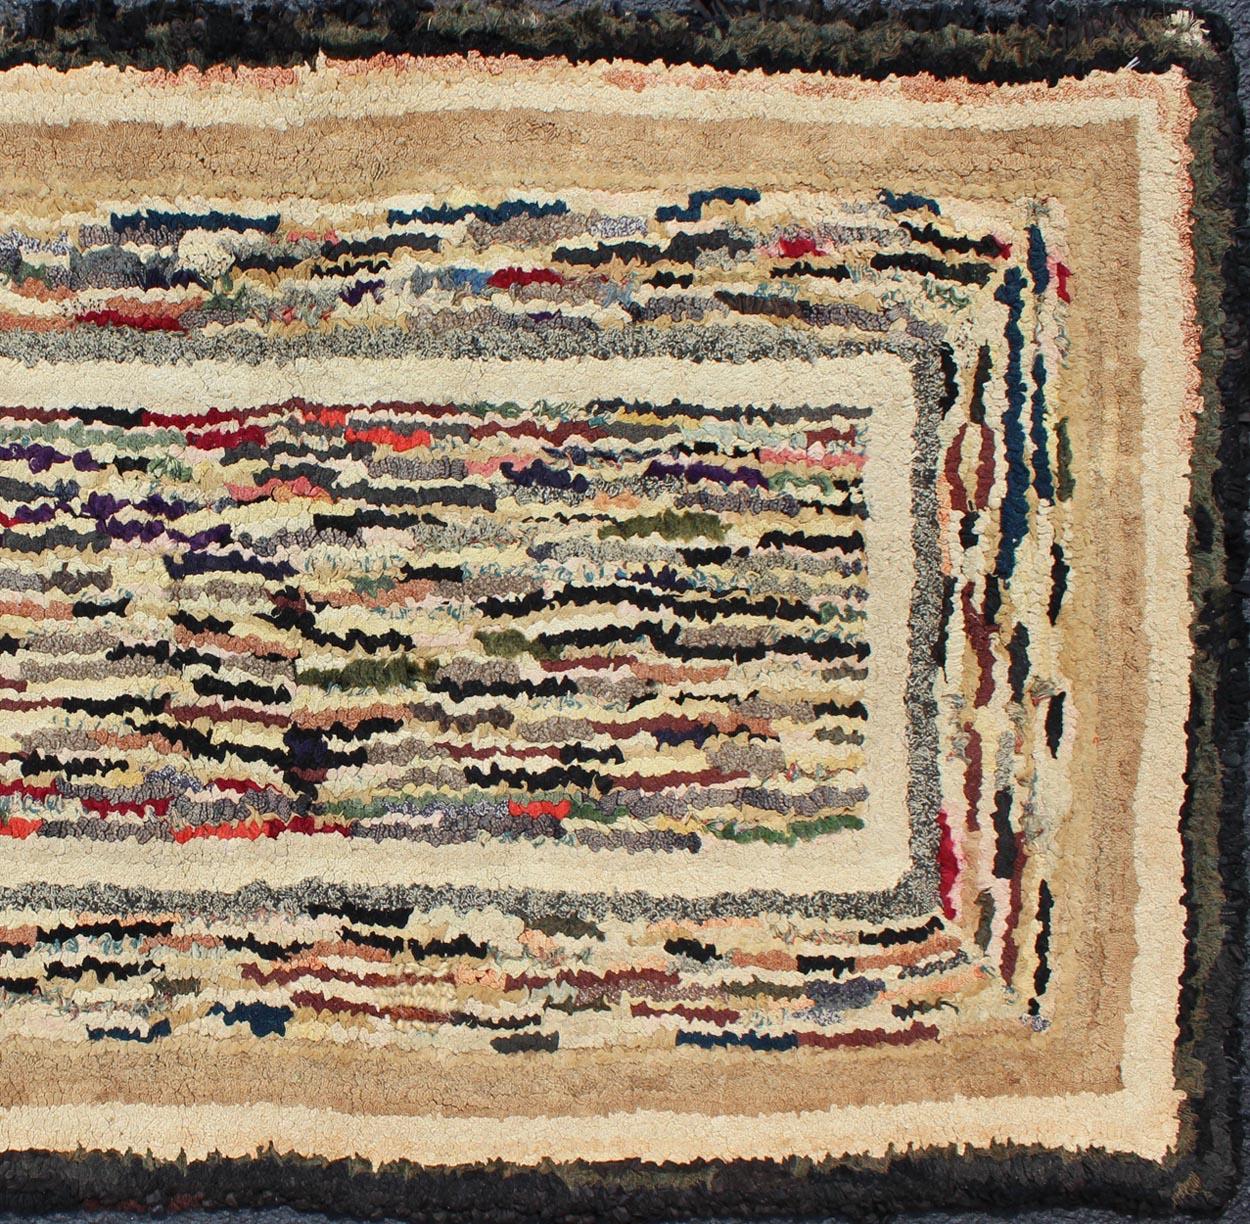 Antique hooked rug with variegated design, Keivan Woven Arts , rug J10-1017, country of origin / type: United States / Hooked, circa 1920.

This antique rug features a variegated stripe design. The rug was woven in a hooked fashion, and the